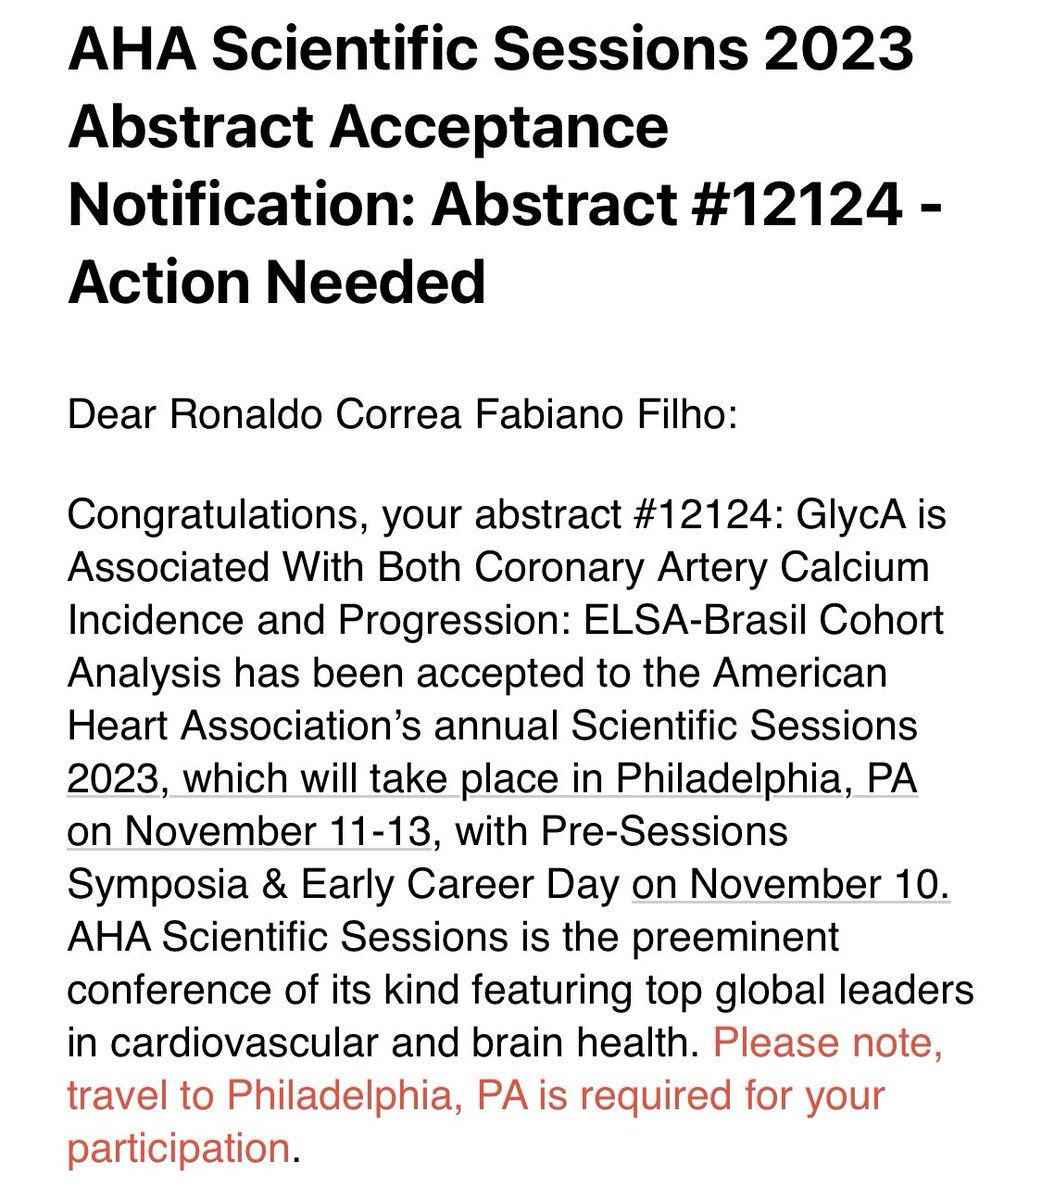 🔥Excited to share - Abstract accepted at #AHA2023 #CardioTwitter GlycA predicts CAC incidence and progression ELZA-Brasil cohort Grateful @MBittencourtMD @generosoMD @RCardoso_MD @rauldsf_santos Isabela Bensenor @PauloLotufo Peter Toth Steven R. Jones